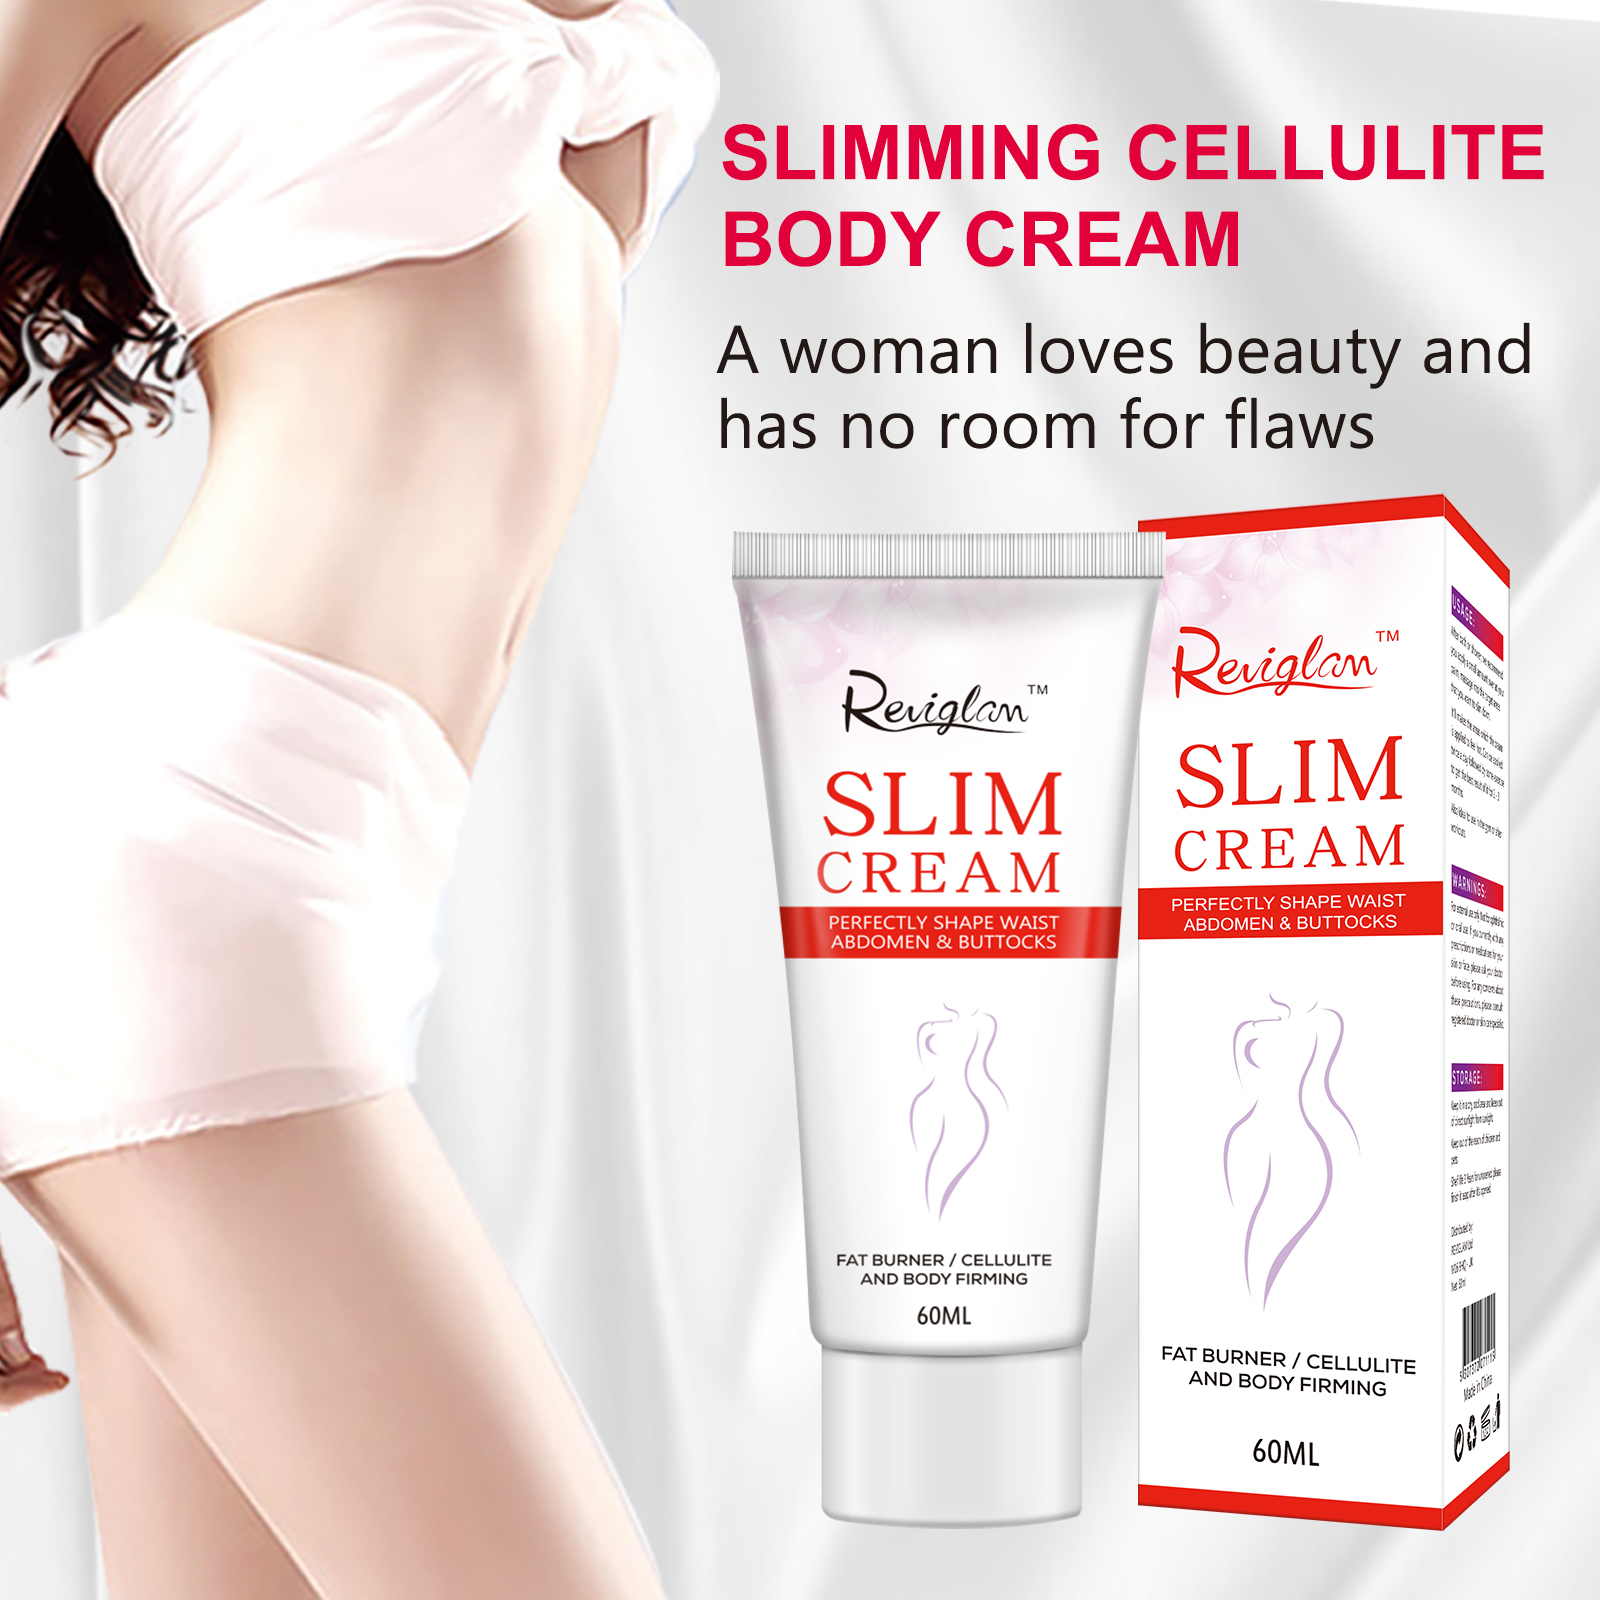 Reviglam Effective Slimming Body Cream Weight Loss Fat Burner Cellulite Removal Full Firming Shape Shaping Waist Abdomen and Buttocks